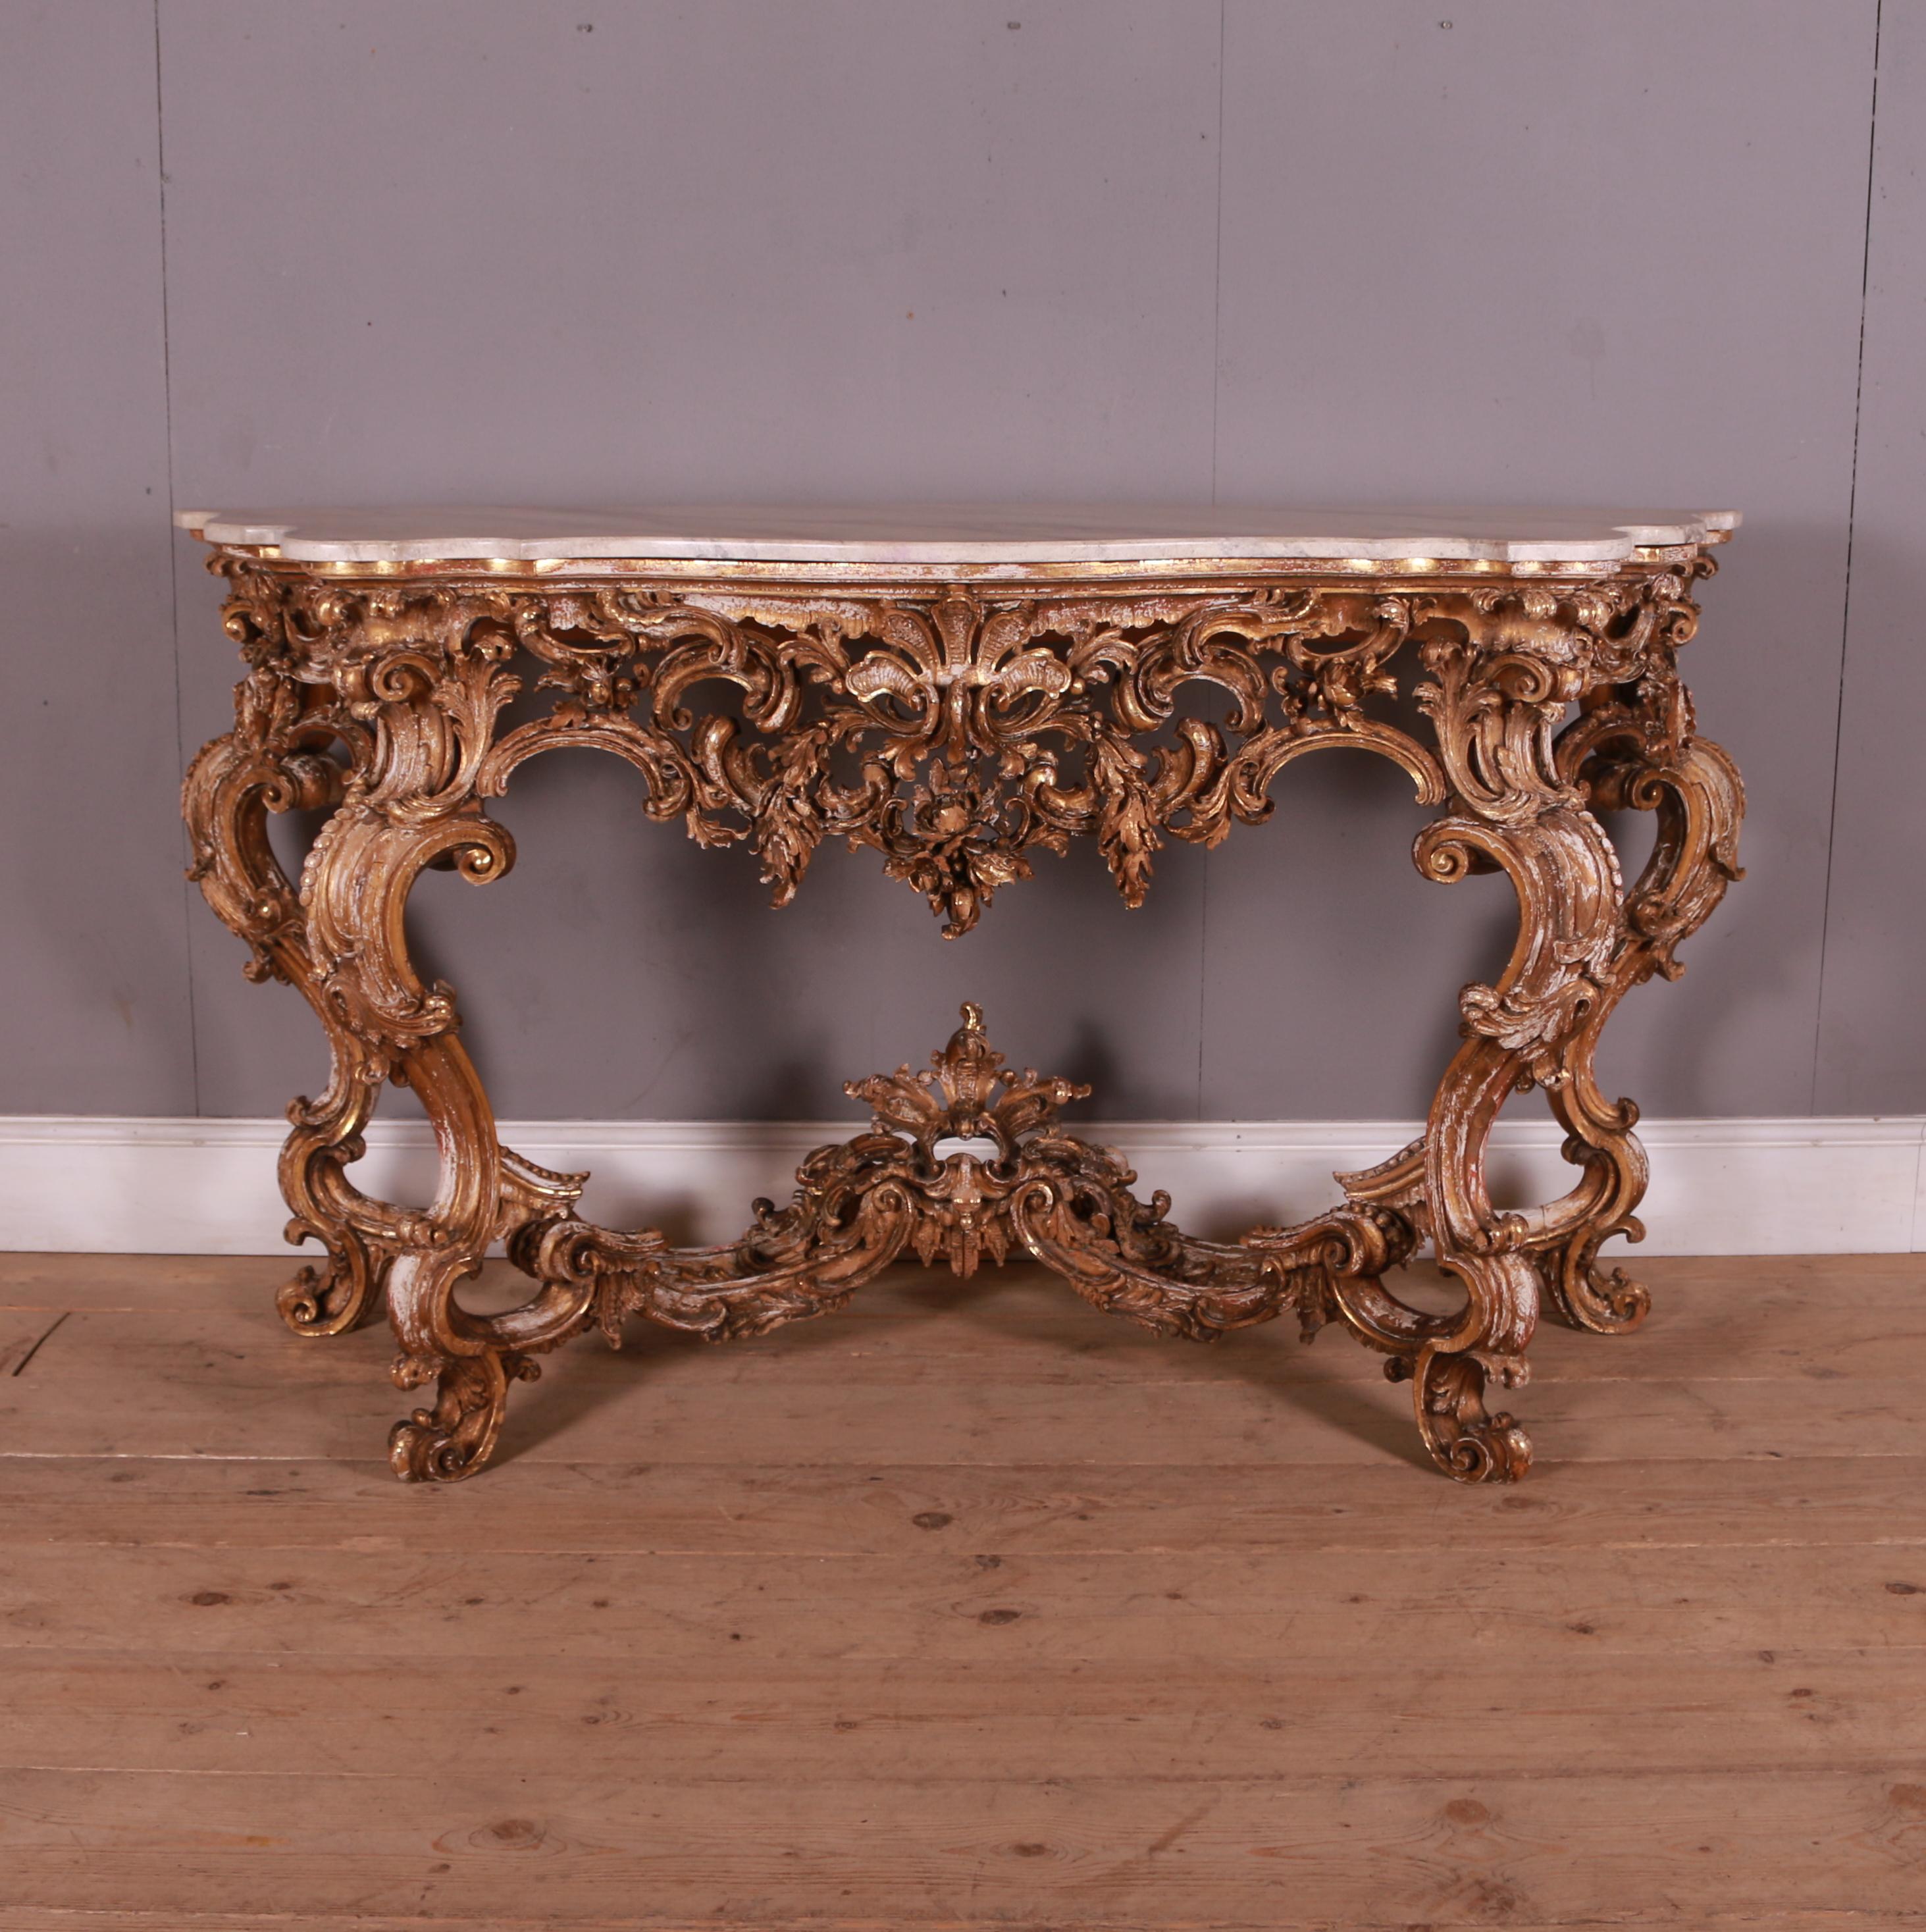 Early 20th C Italian carved giltwood console table with faux marble top. 1920.

Dimensions
68.5 inches (174 cms) wide
24 inches (61 cms) deep
37 inches (94 cms) high.

  